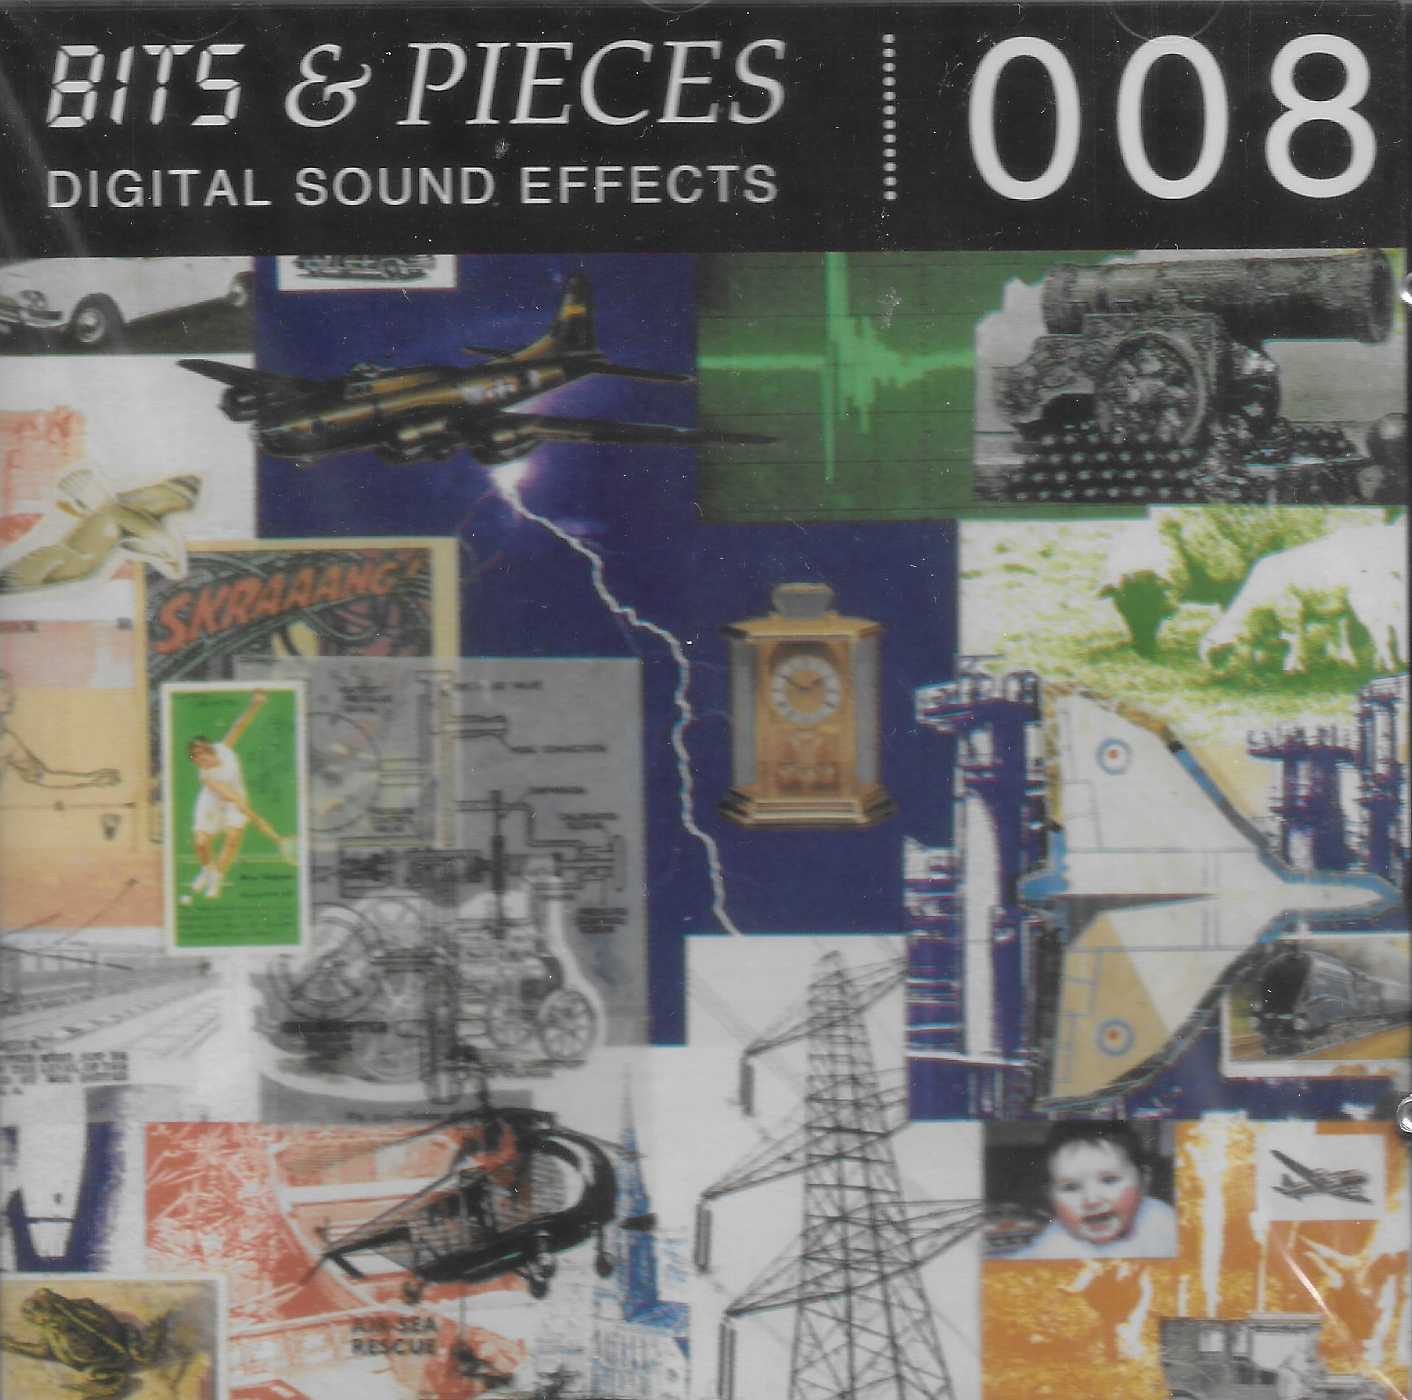 Picture of Bits & pieces digital sound effects 008 by artist Various from ITV, Channel 4 and Channel 5 cds library